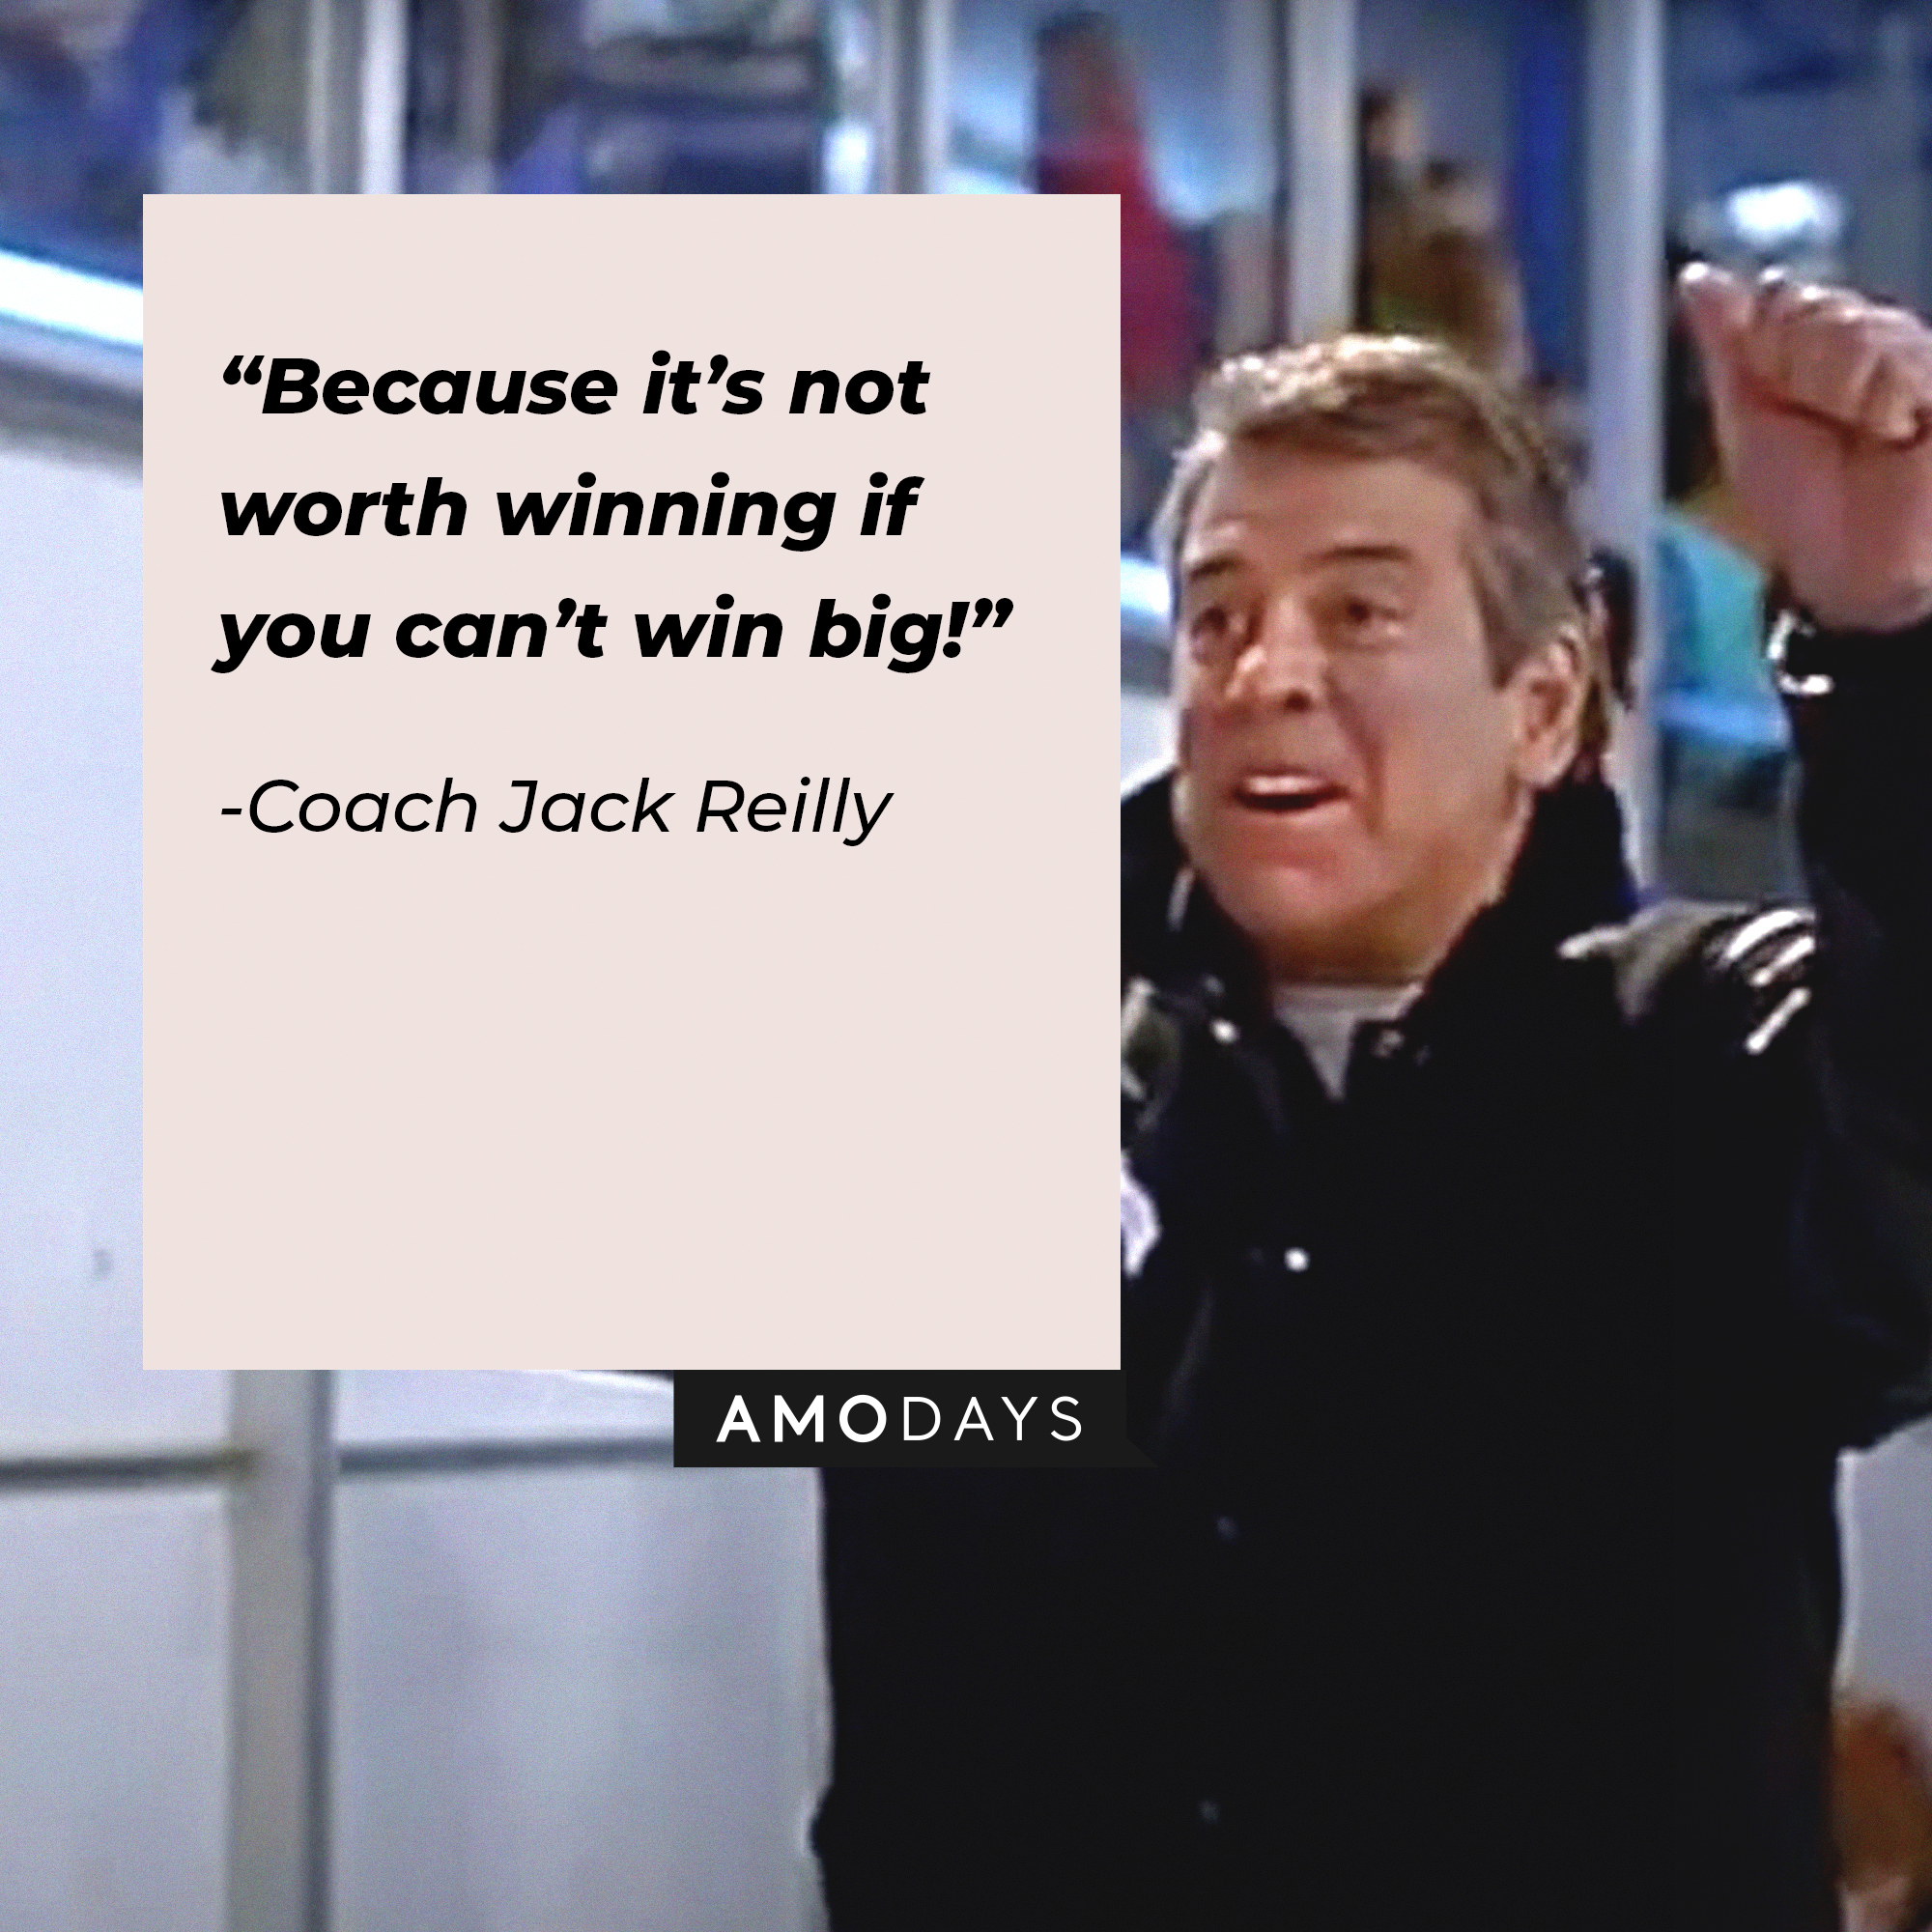 A picture of Coach Jack Reily with a quote by him : “Because it’s not worth winning if you can’t win big!” | Source: youtube.com/disneyplus